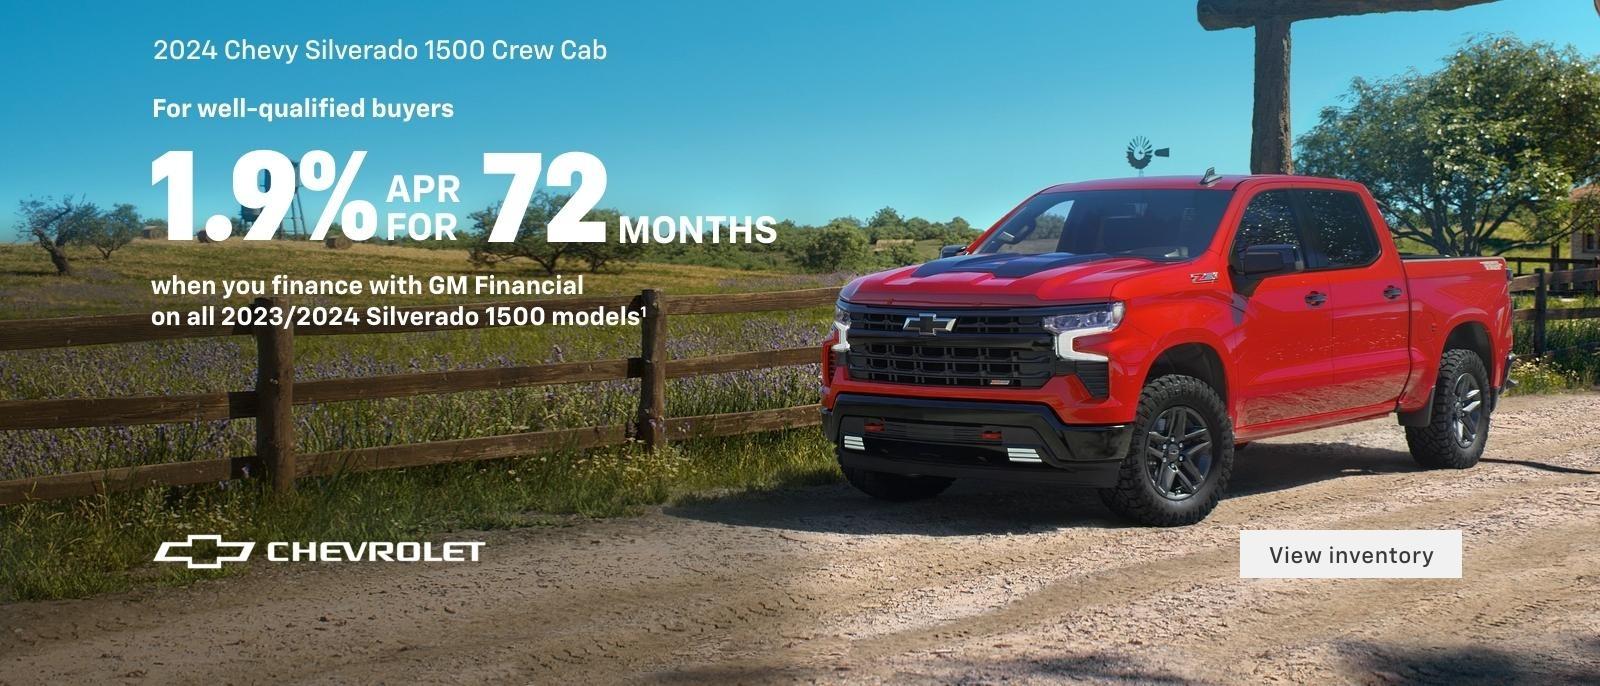 2024 Silverado Crew 1500 Cab. For qualified buyers. 1.9% APR for 72 months when you finance with GM Financial on all 2023/2024 Silverado 1500 models.